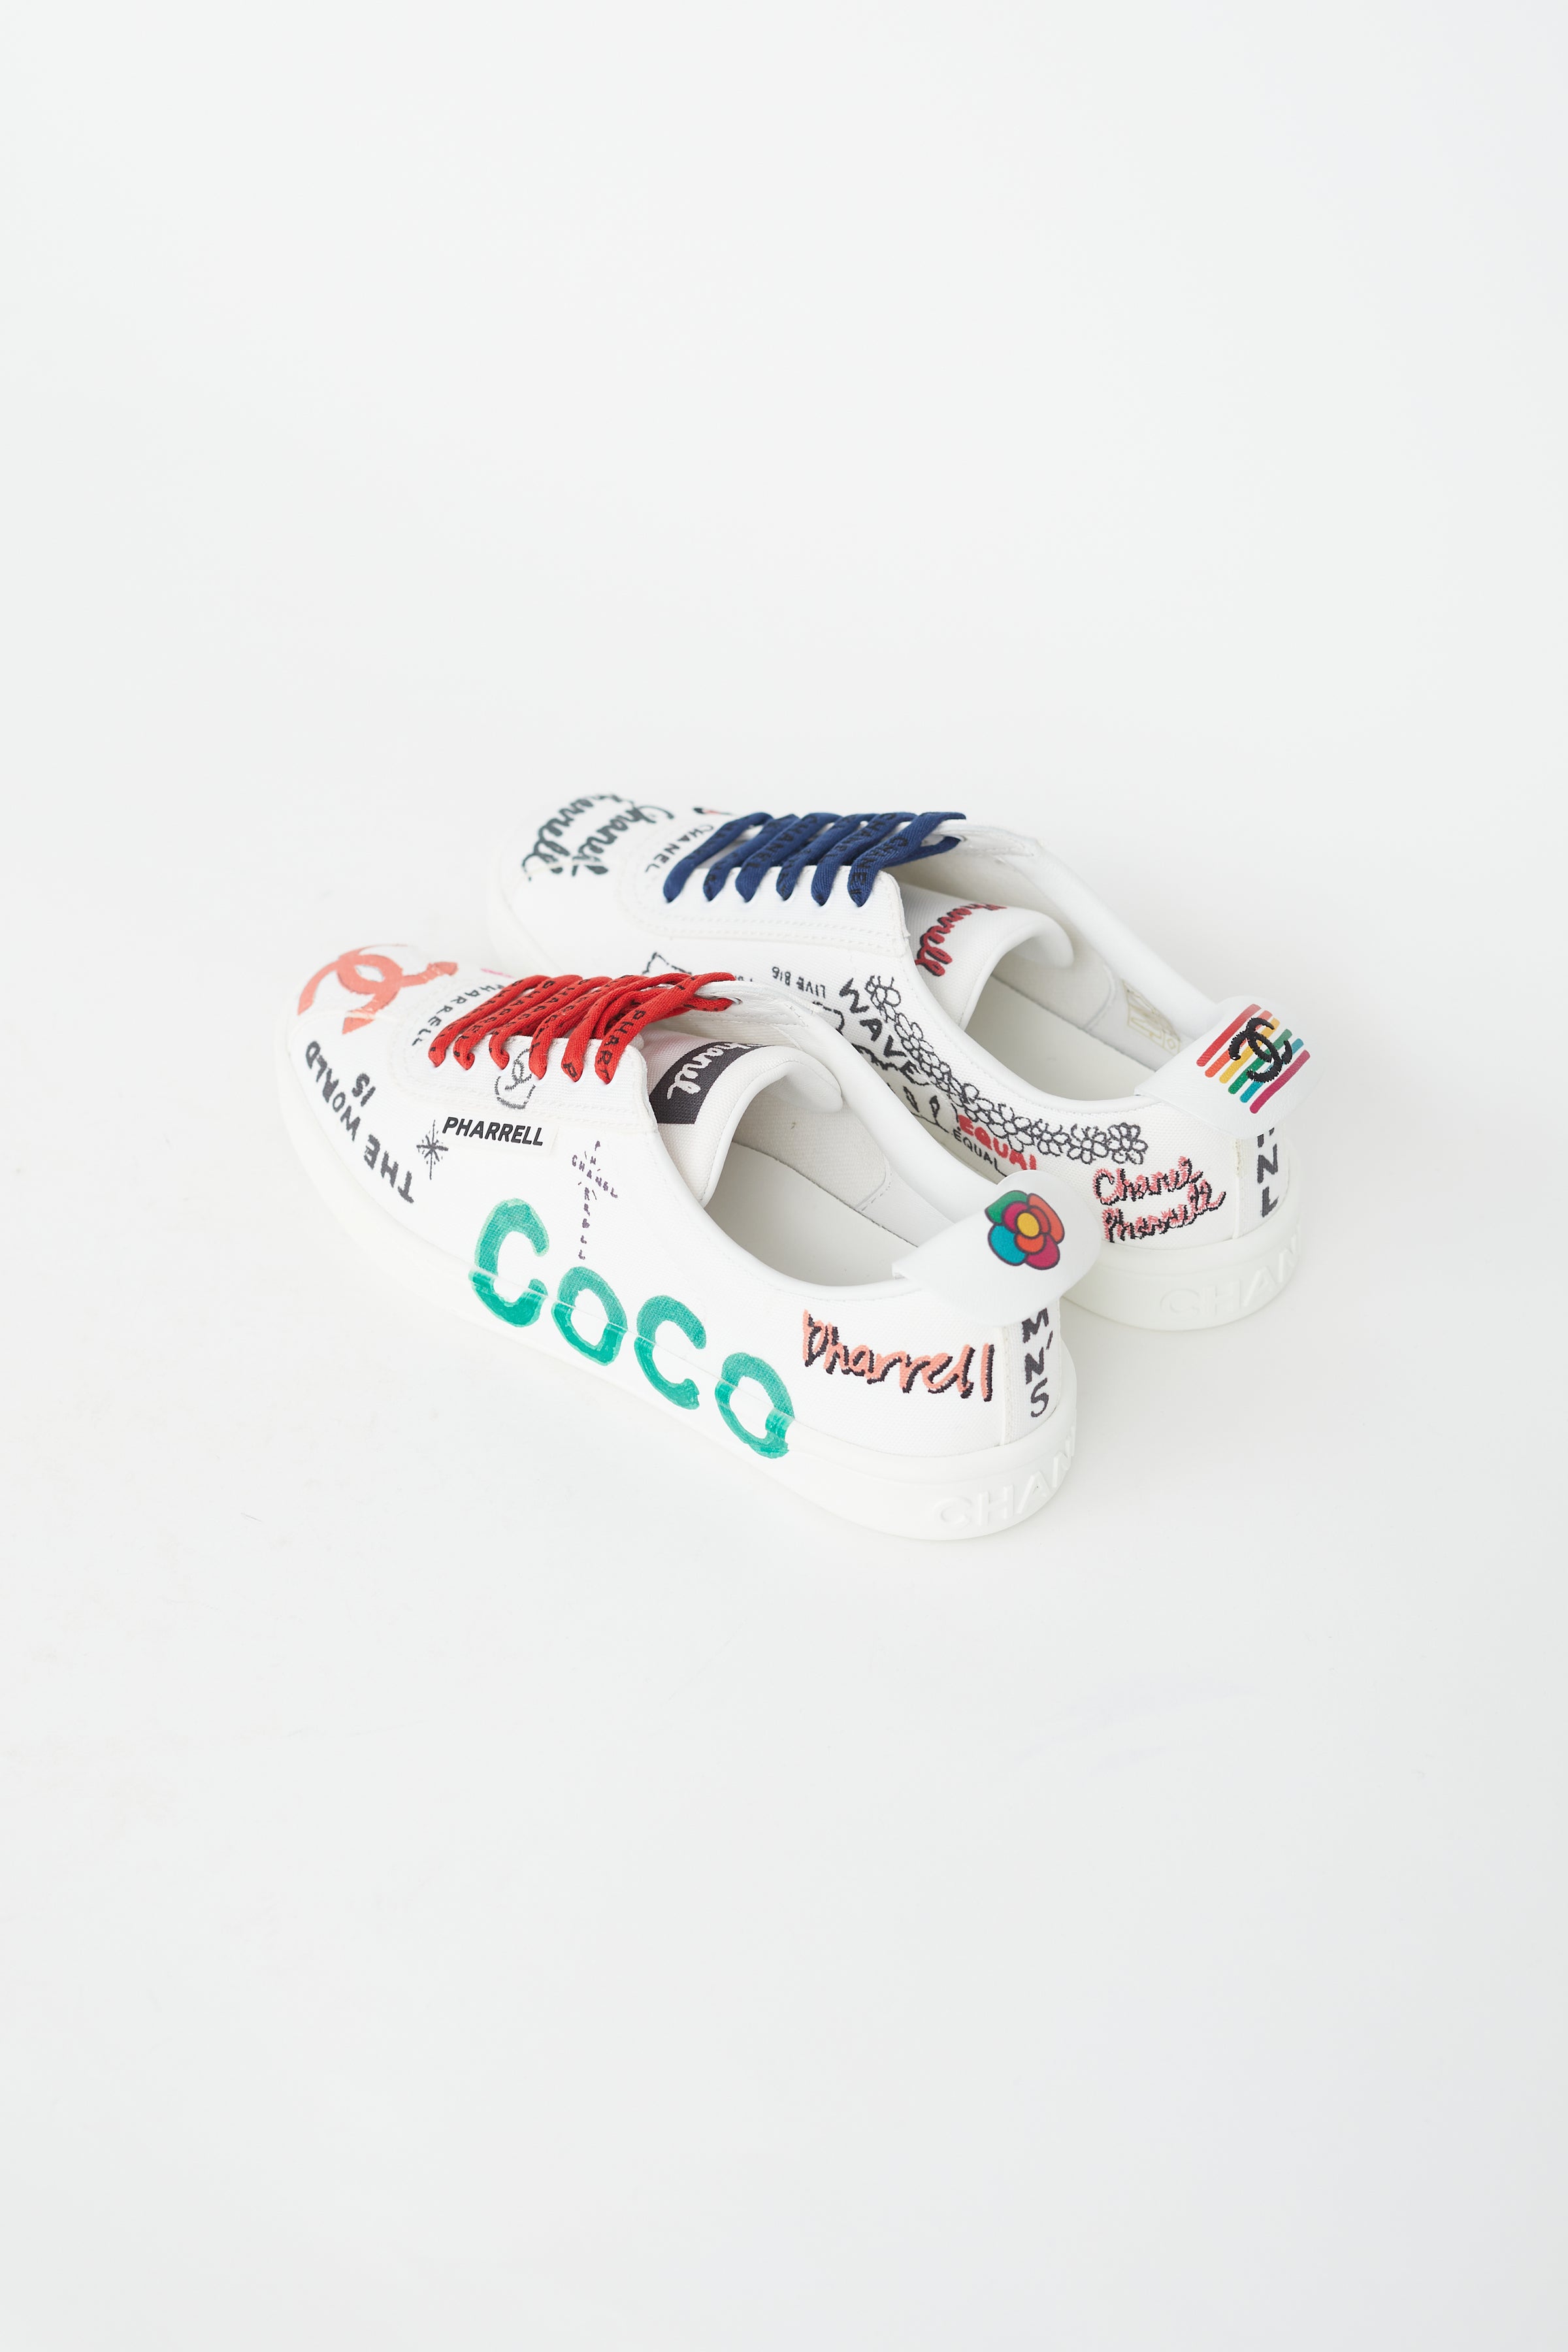 Chanel // X Pharrell White Canvas & Multicolor Low Top Sneaker